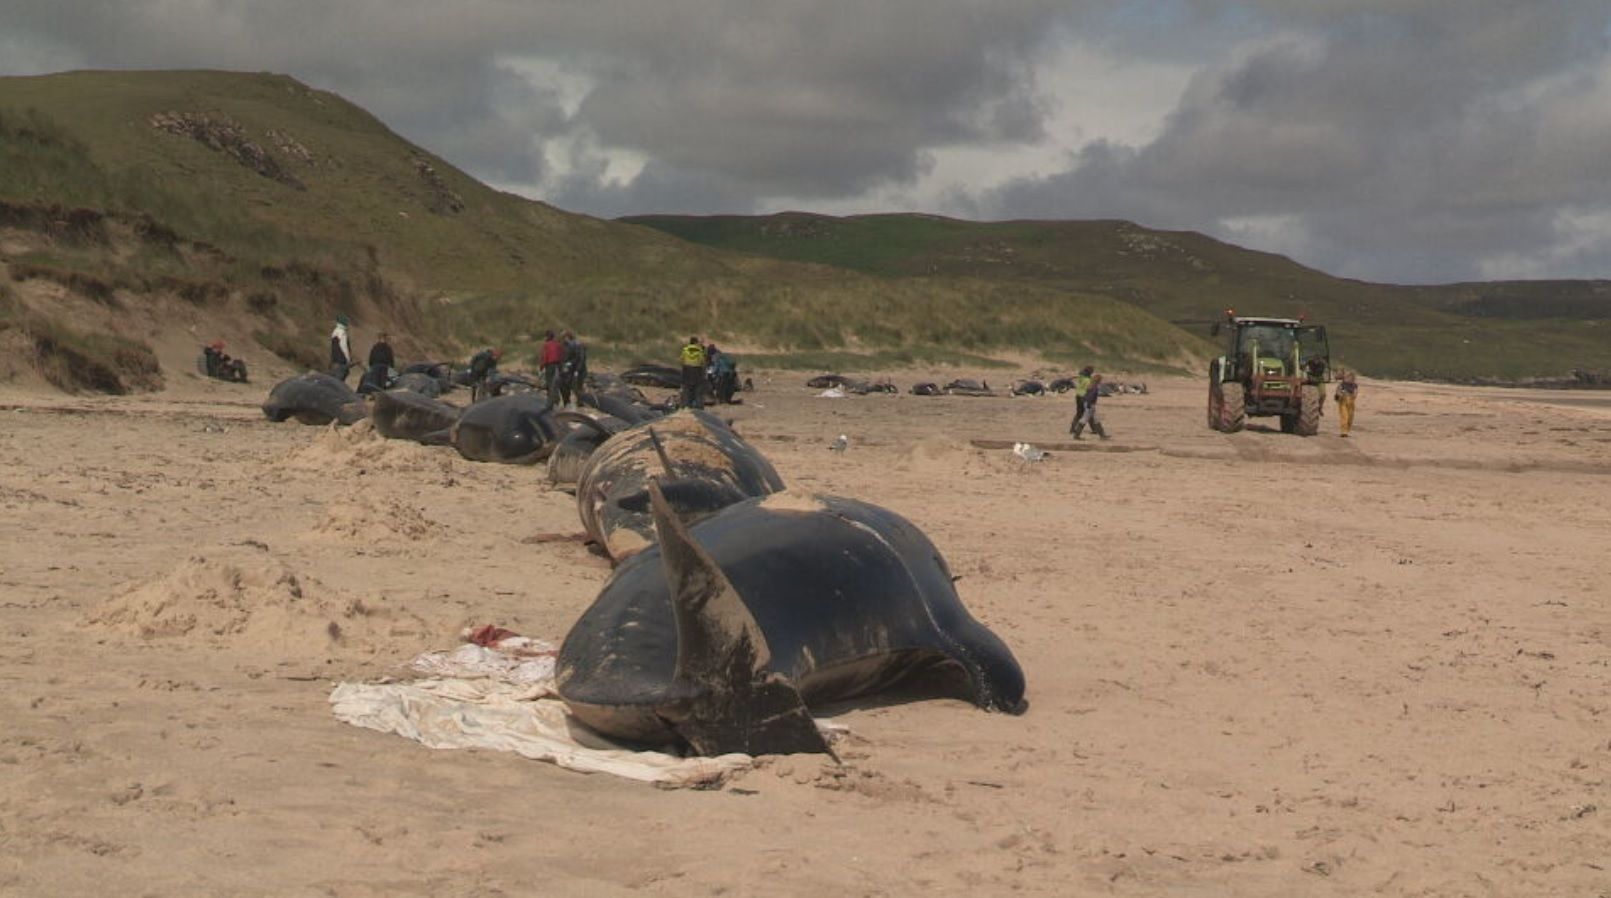 Work is underway to clear the whales from Traigh Morh beach